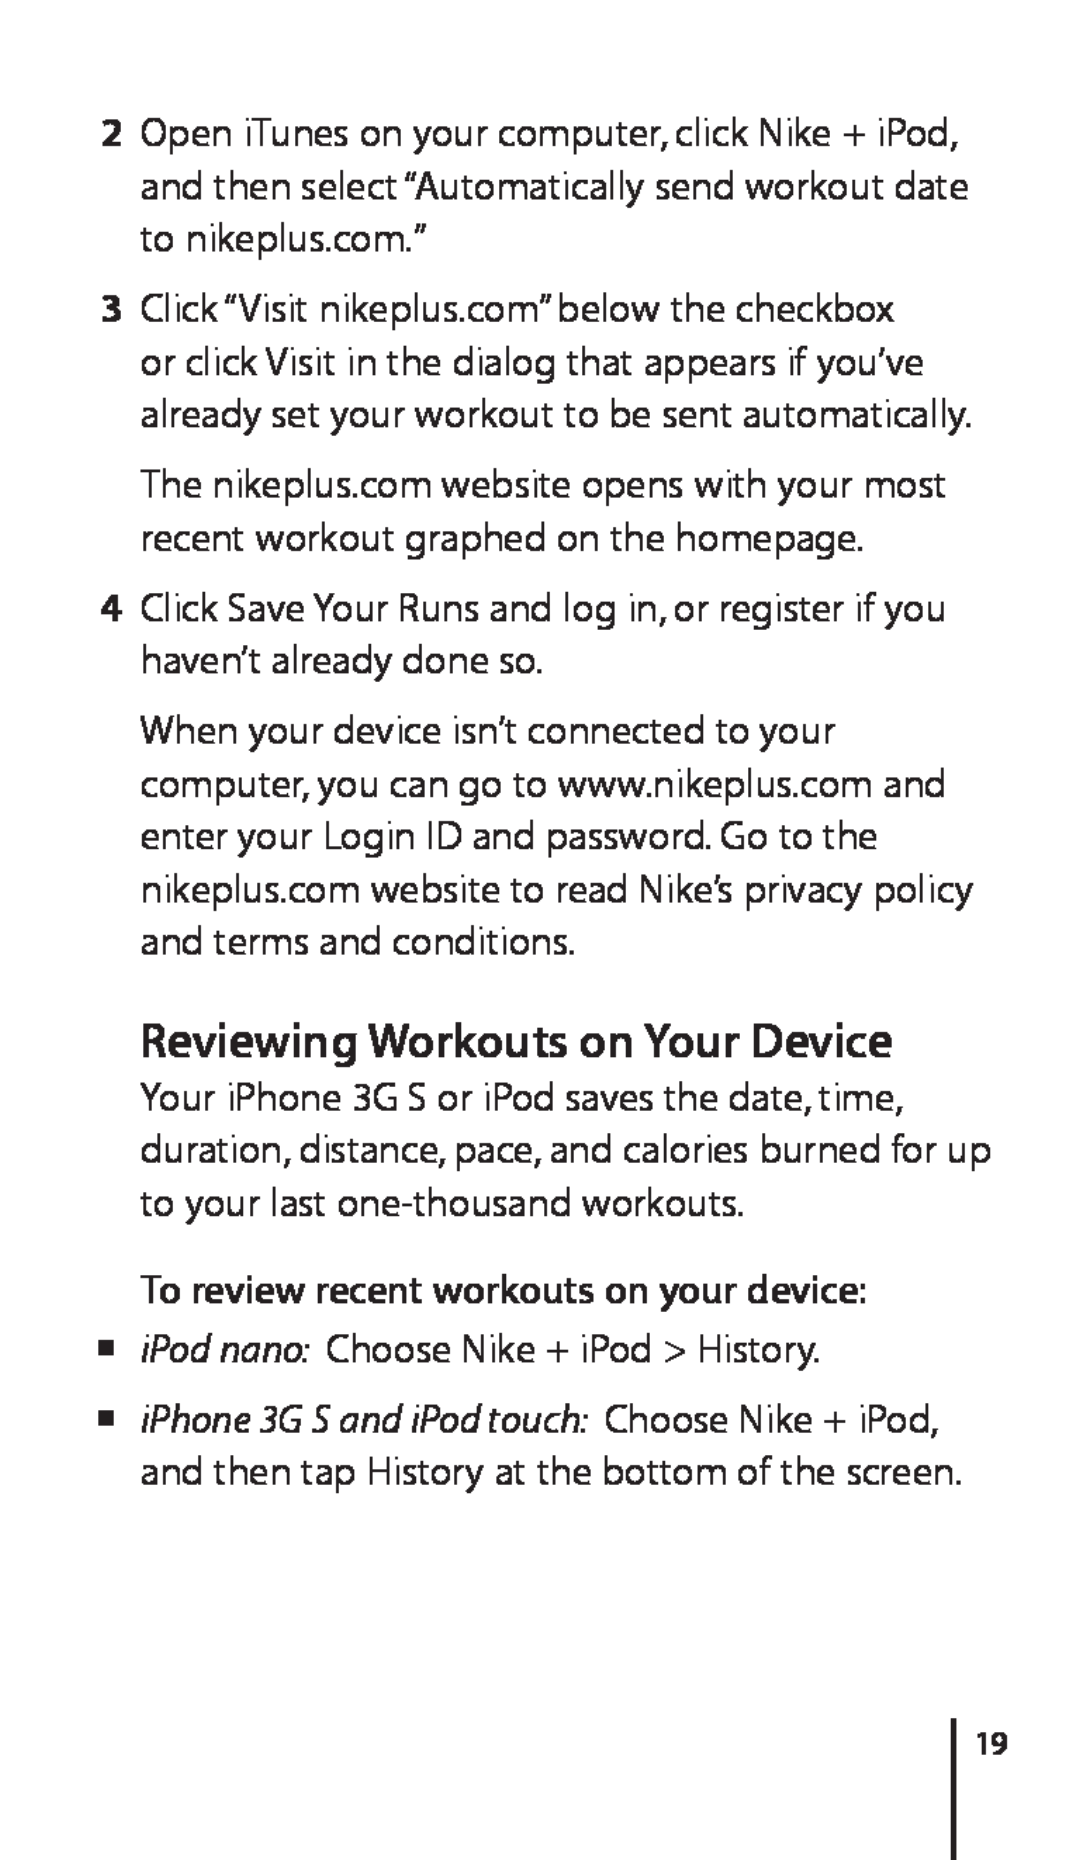 Apple 034-4945-A, Nike + iPod Sensor manual Reviewing Workouts on Your Device, To review recent workouts on your device 